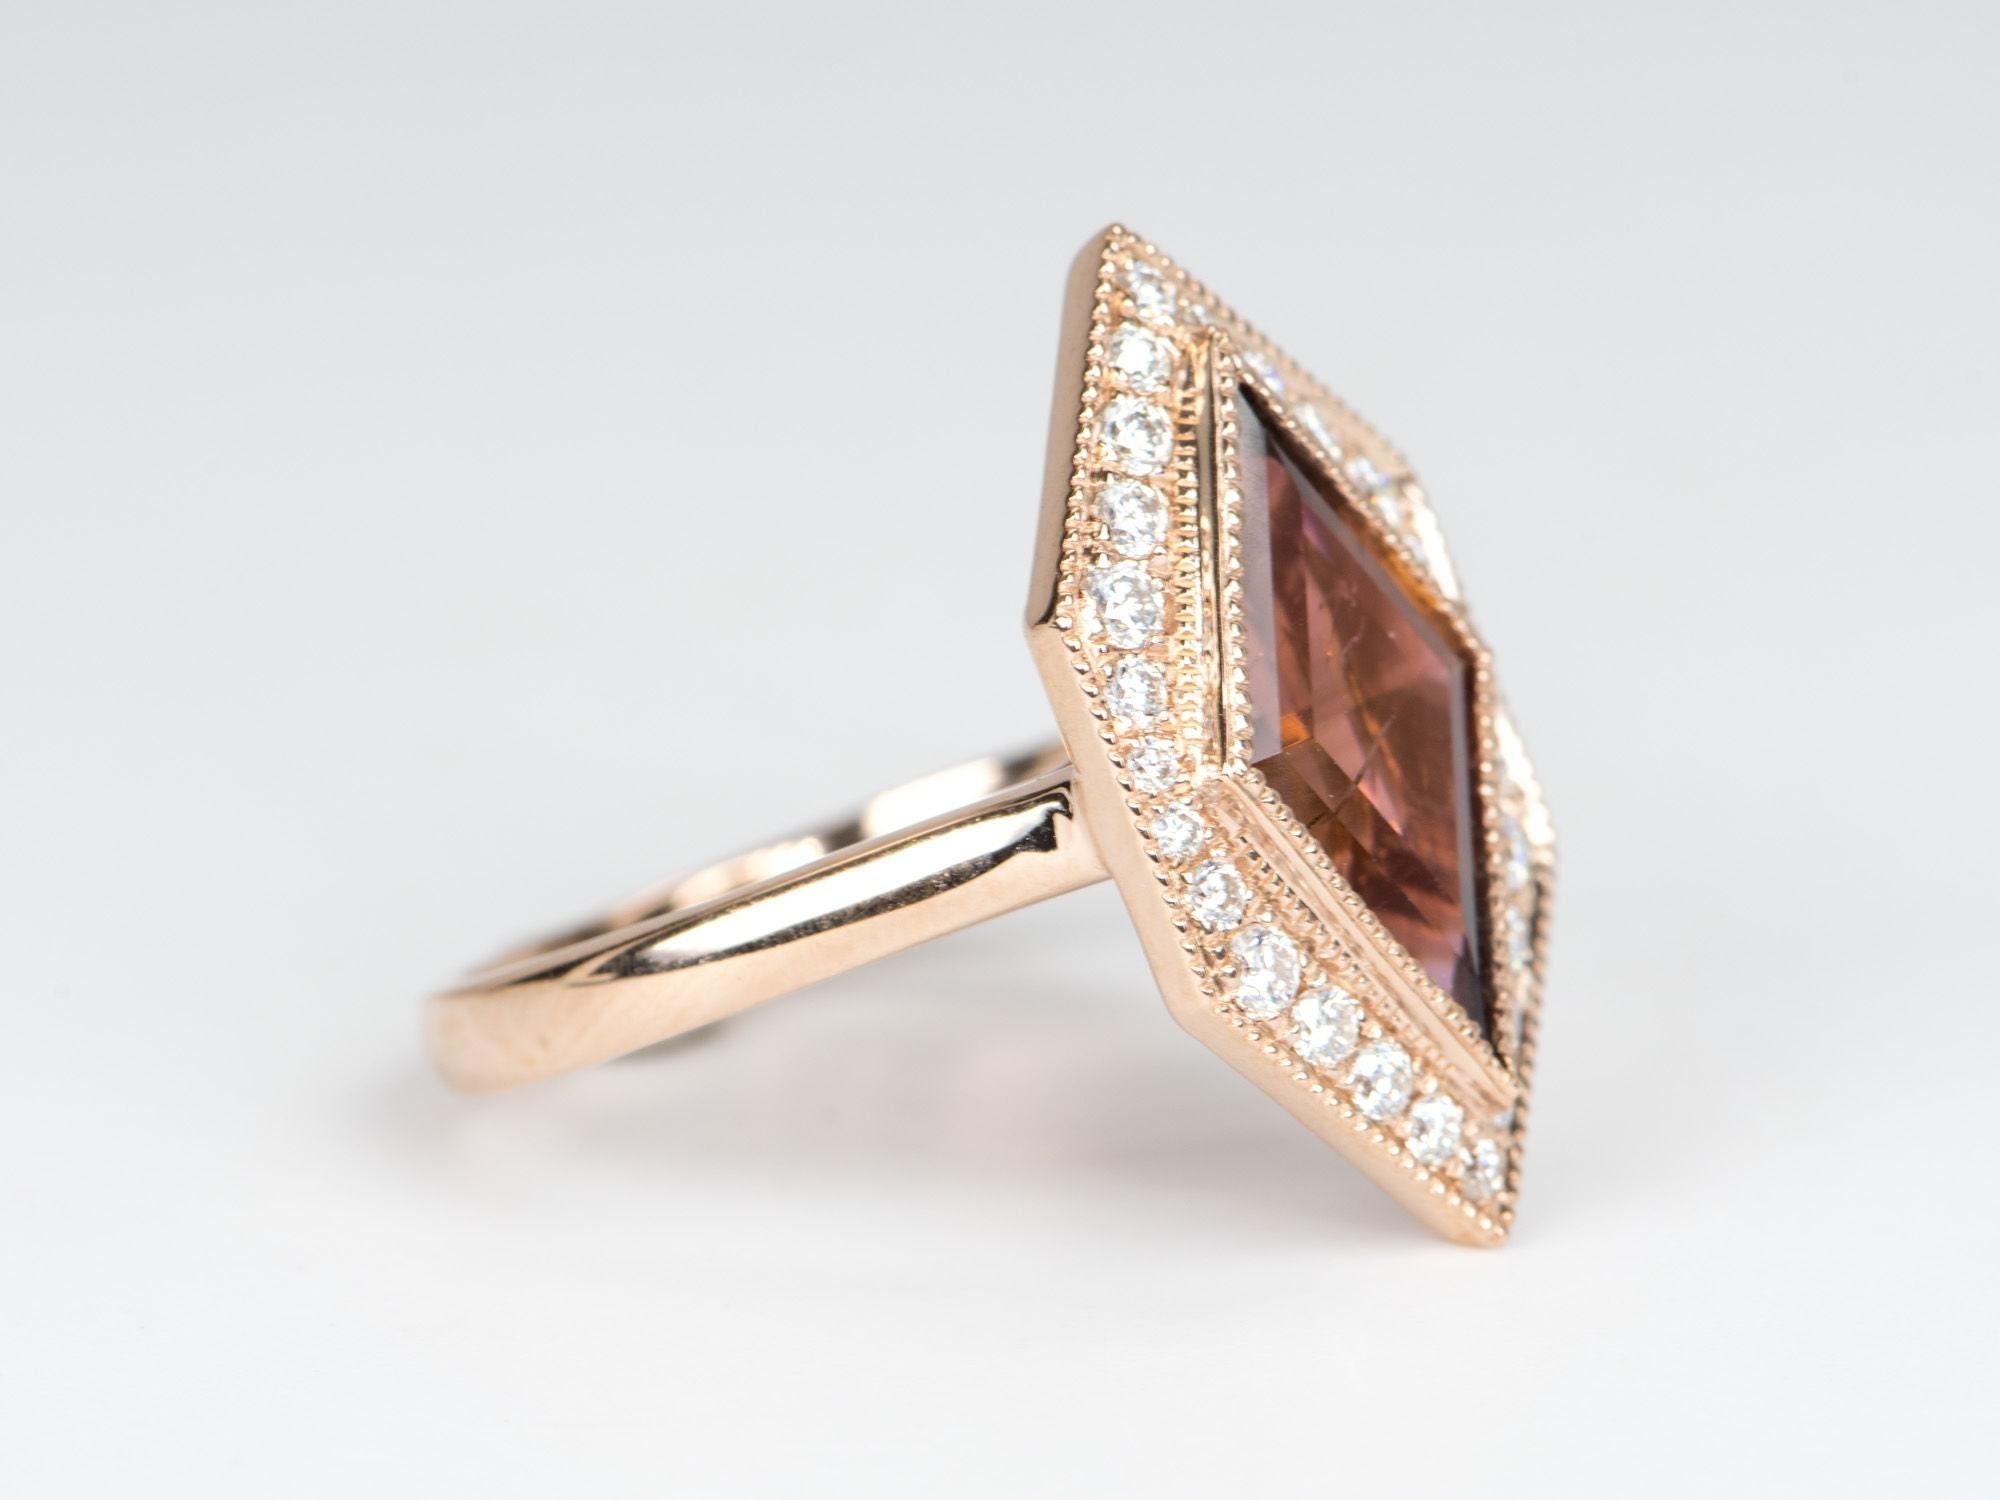 ♥ 3.99ct Kite Shape Pink Tourmaline with Unique Moissanite Halo Hexagon Shape Statement Ring 14K Rose Gold
♥ Solid 14k rose gold ring set with a beautiful kite-shaped tourmaline
♥ Gorgeous pink red color!
♥ The item measures 23.2 mm in length, 13.8